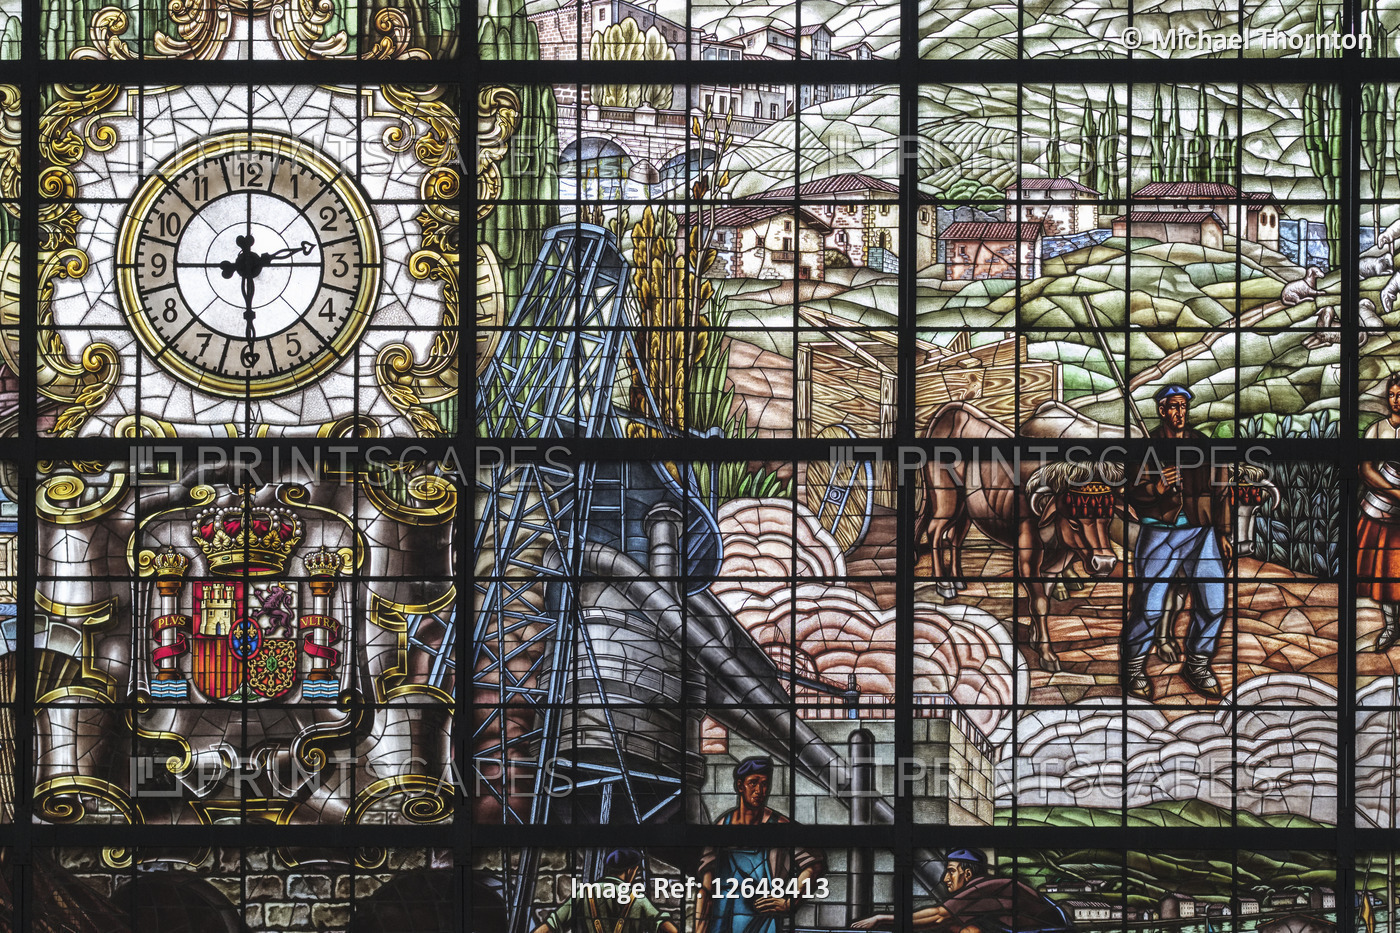 Sections of the Stained glass mural in the Estacion Abando Indalecio Prieto; ...